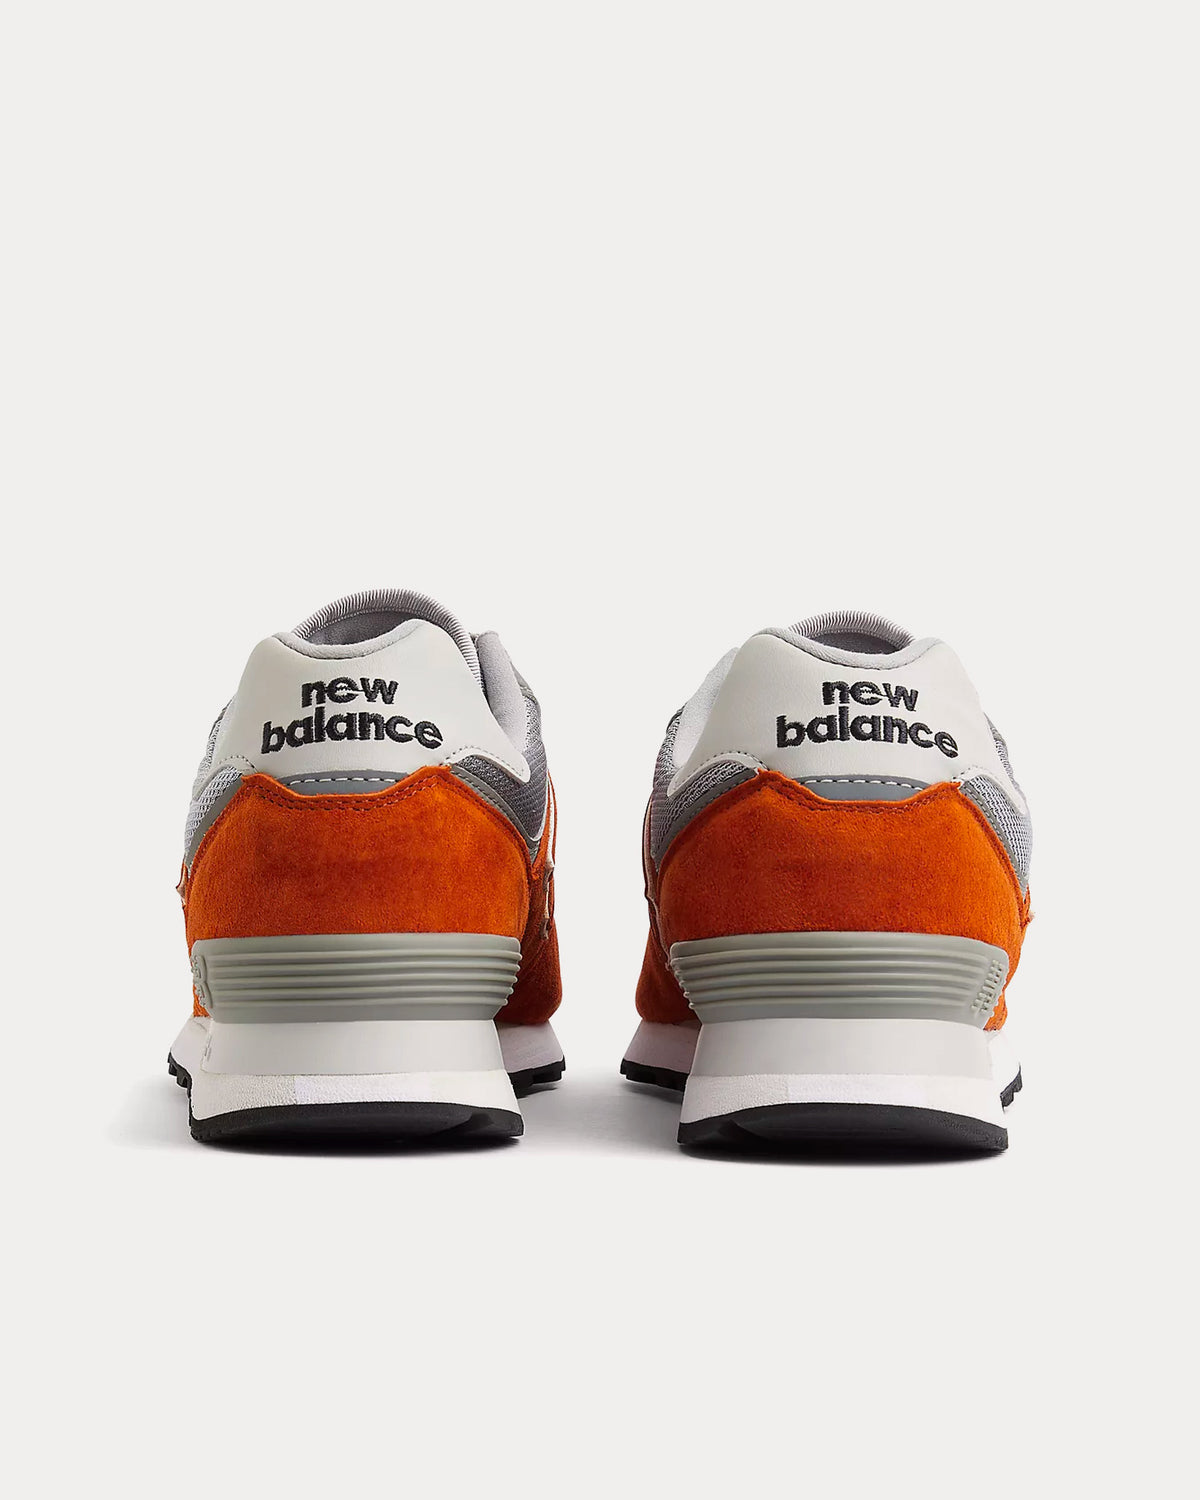 New Balance - MADE in UK 576 Orange / Alloy / Gray Violet Low Top Sneakers